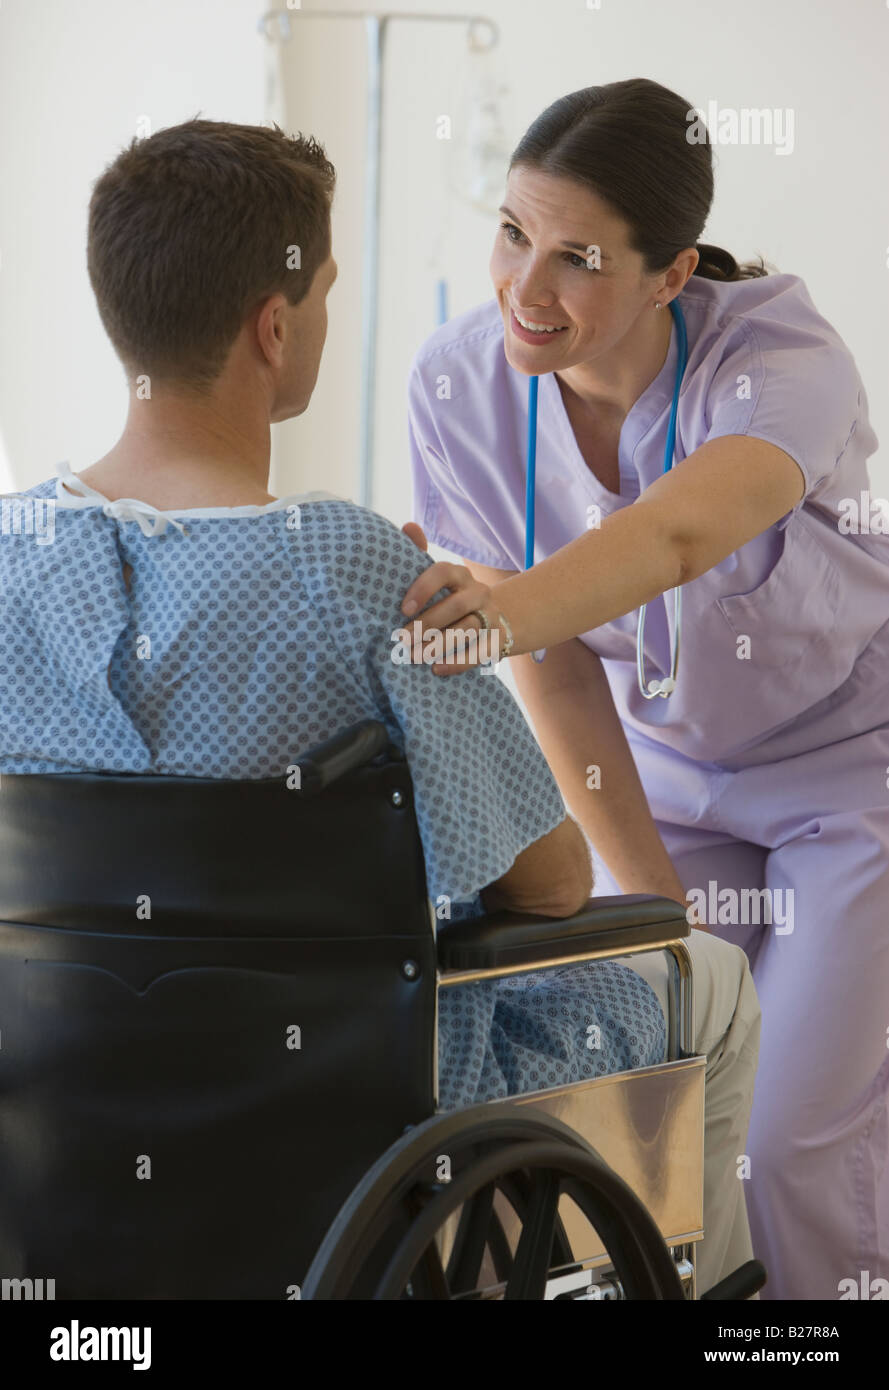 Female nurse with hand on patient’s shoulder Stock Photo